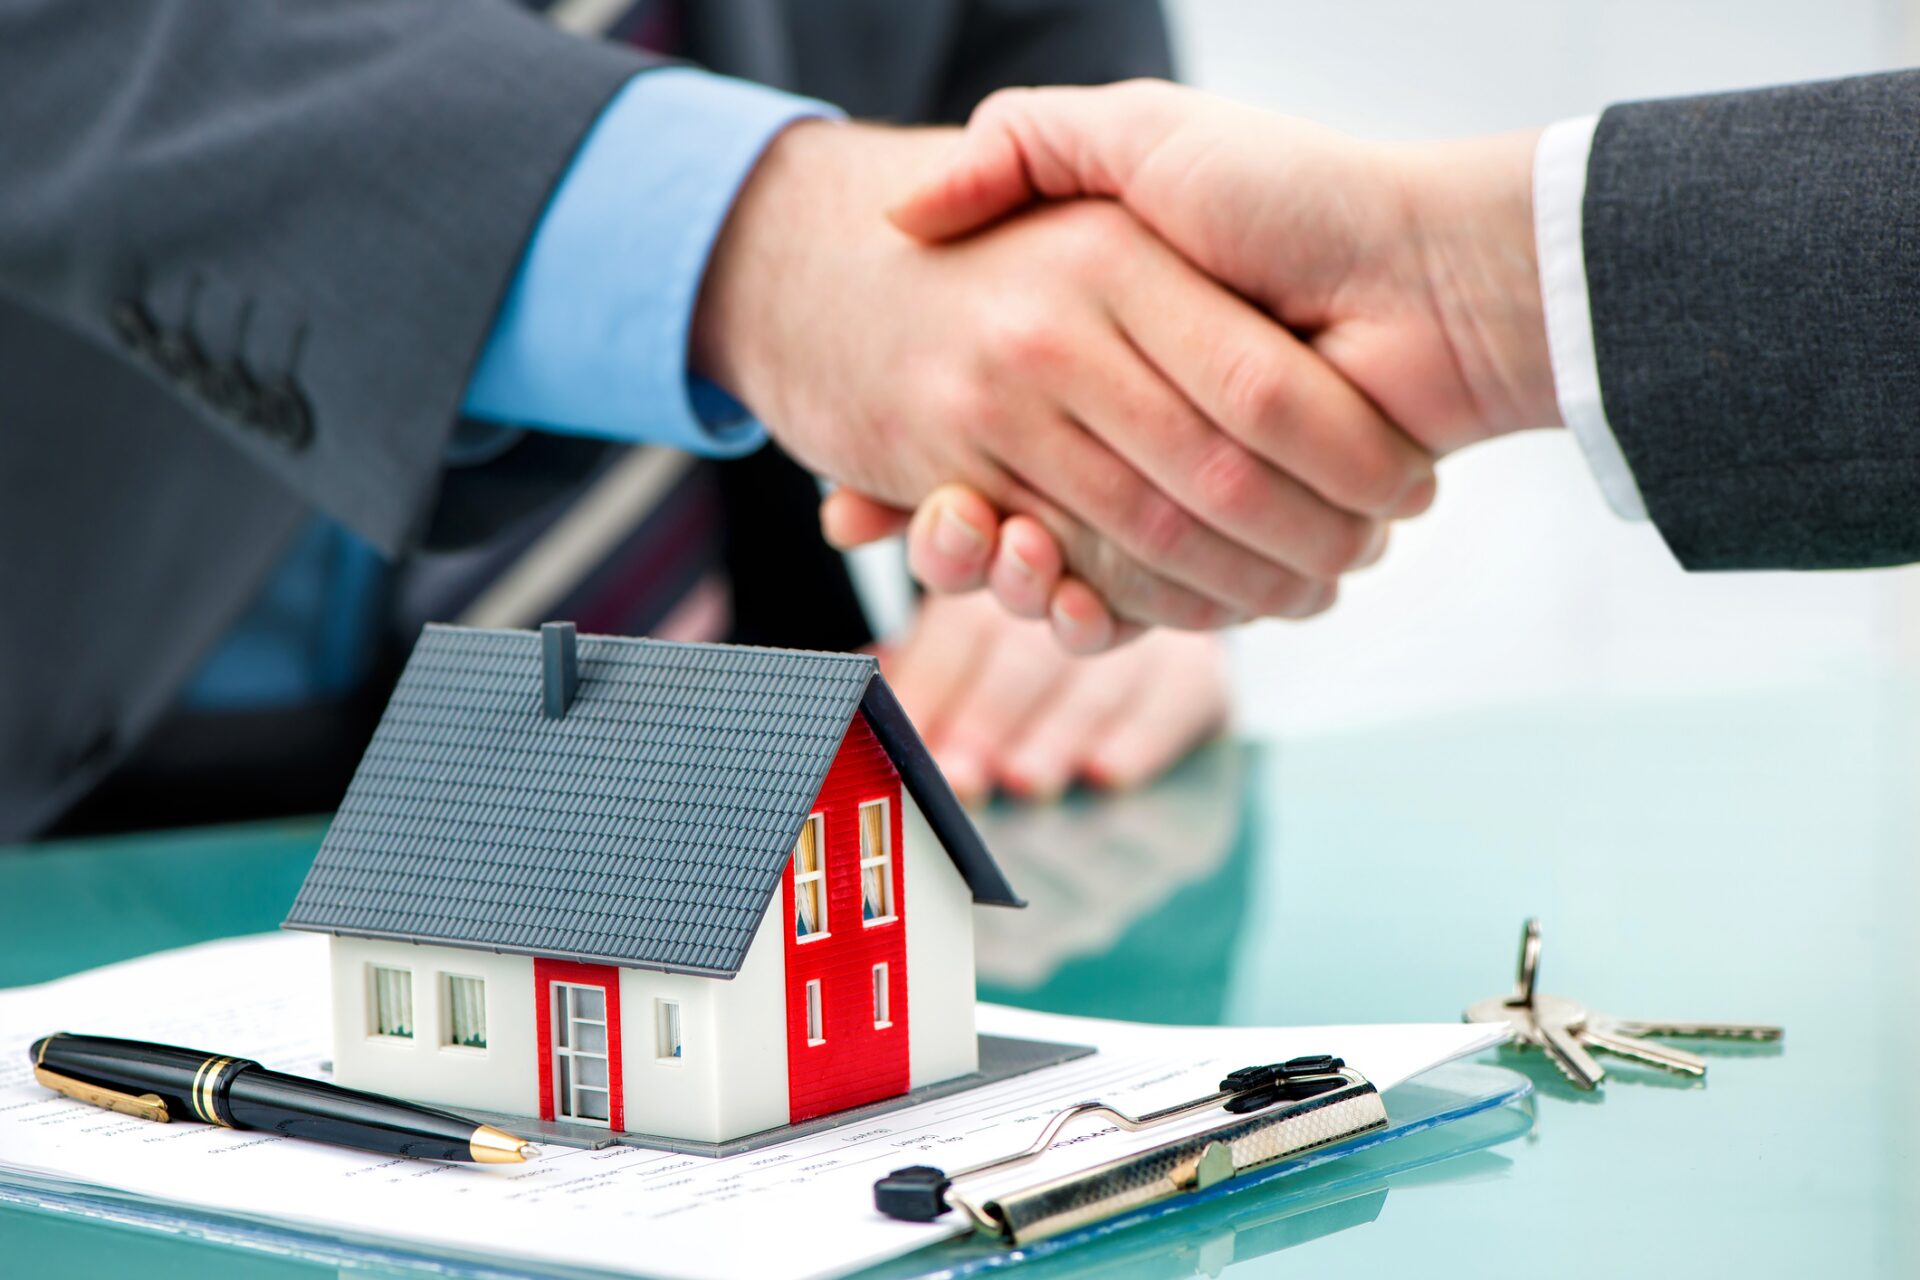 Whether you choose to sell your home or rent it out depends on your individual circumstances. 